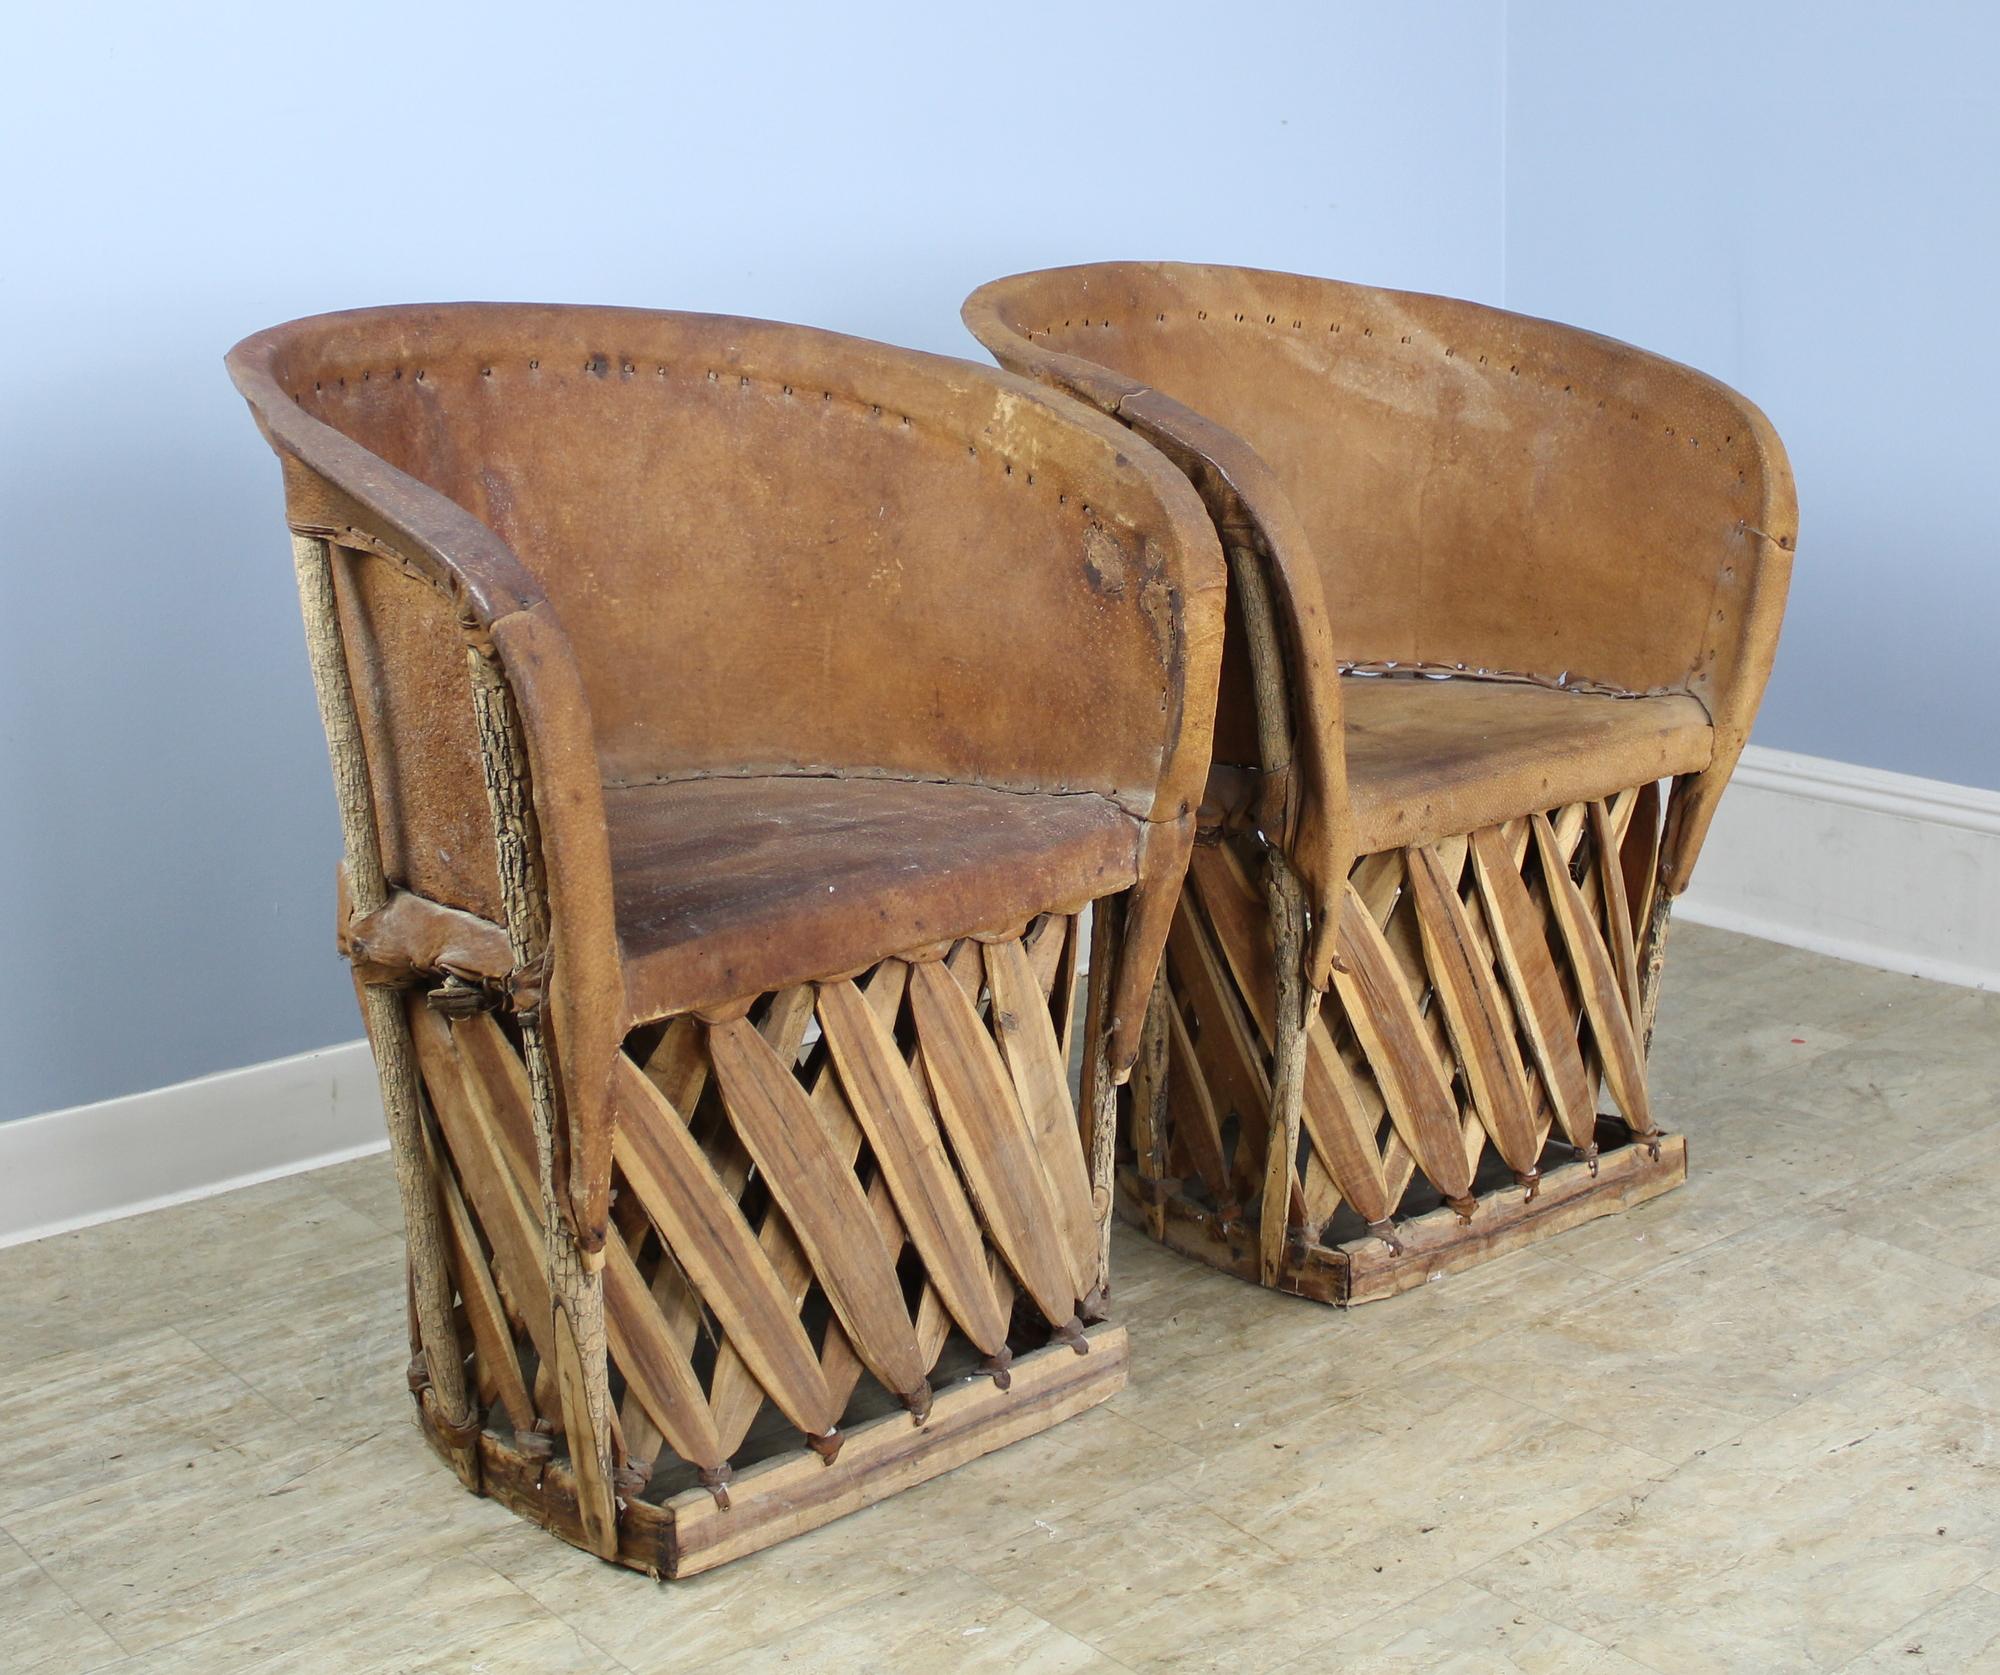 A cool pair of vintage Mexican armchairs, made in the traditional way with stretched pig skin and cedar strips. Natural branch supports complete the look. Note: There is a slight variation in chair width and seat height between the two chairs, but